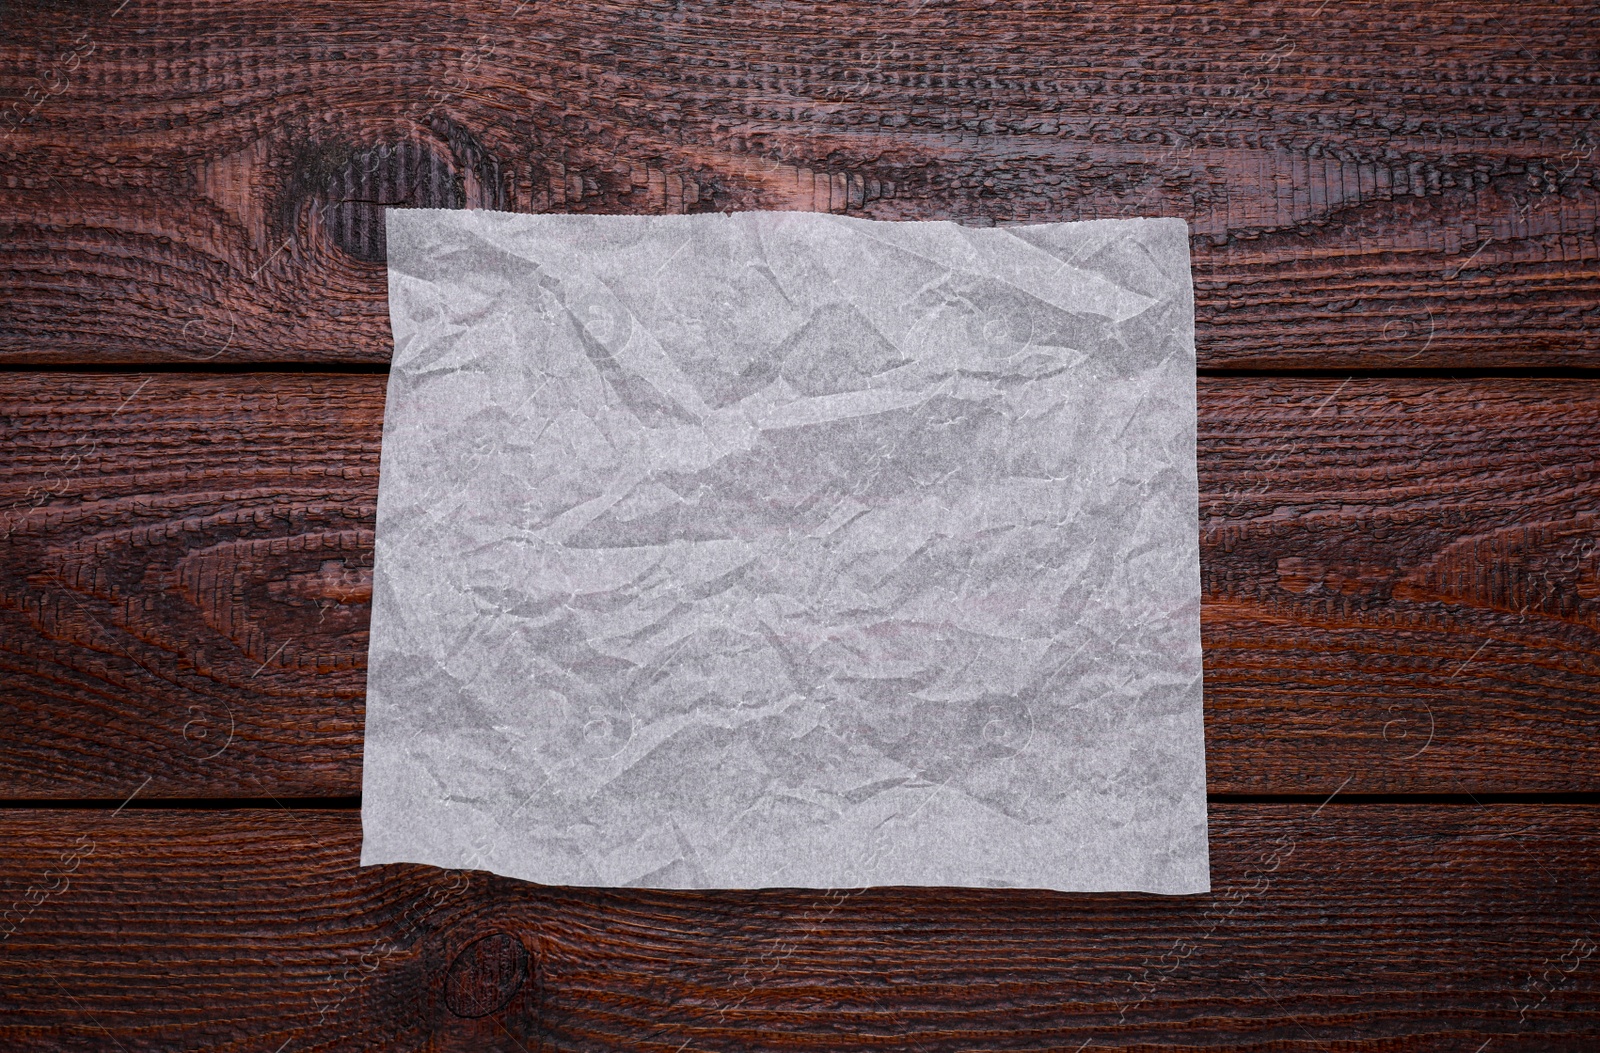 Photo of Sheet of baking paper on wooden table, top view